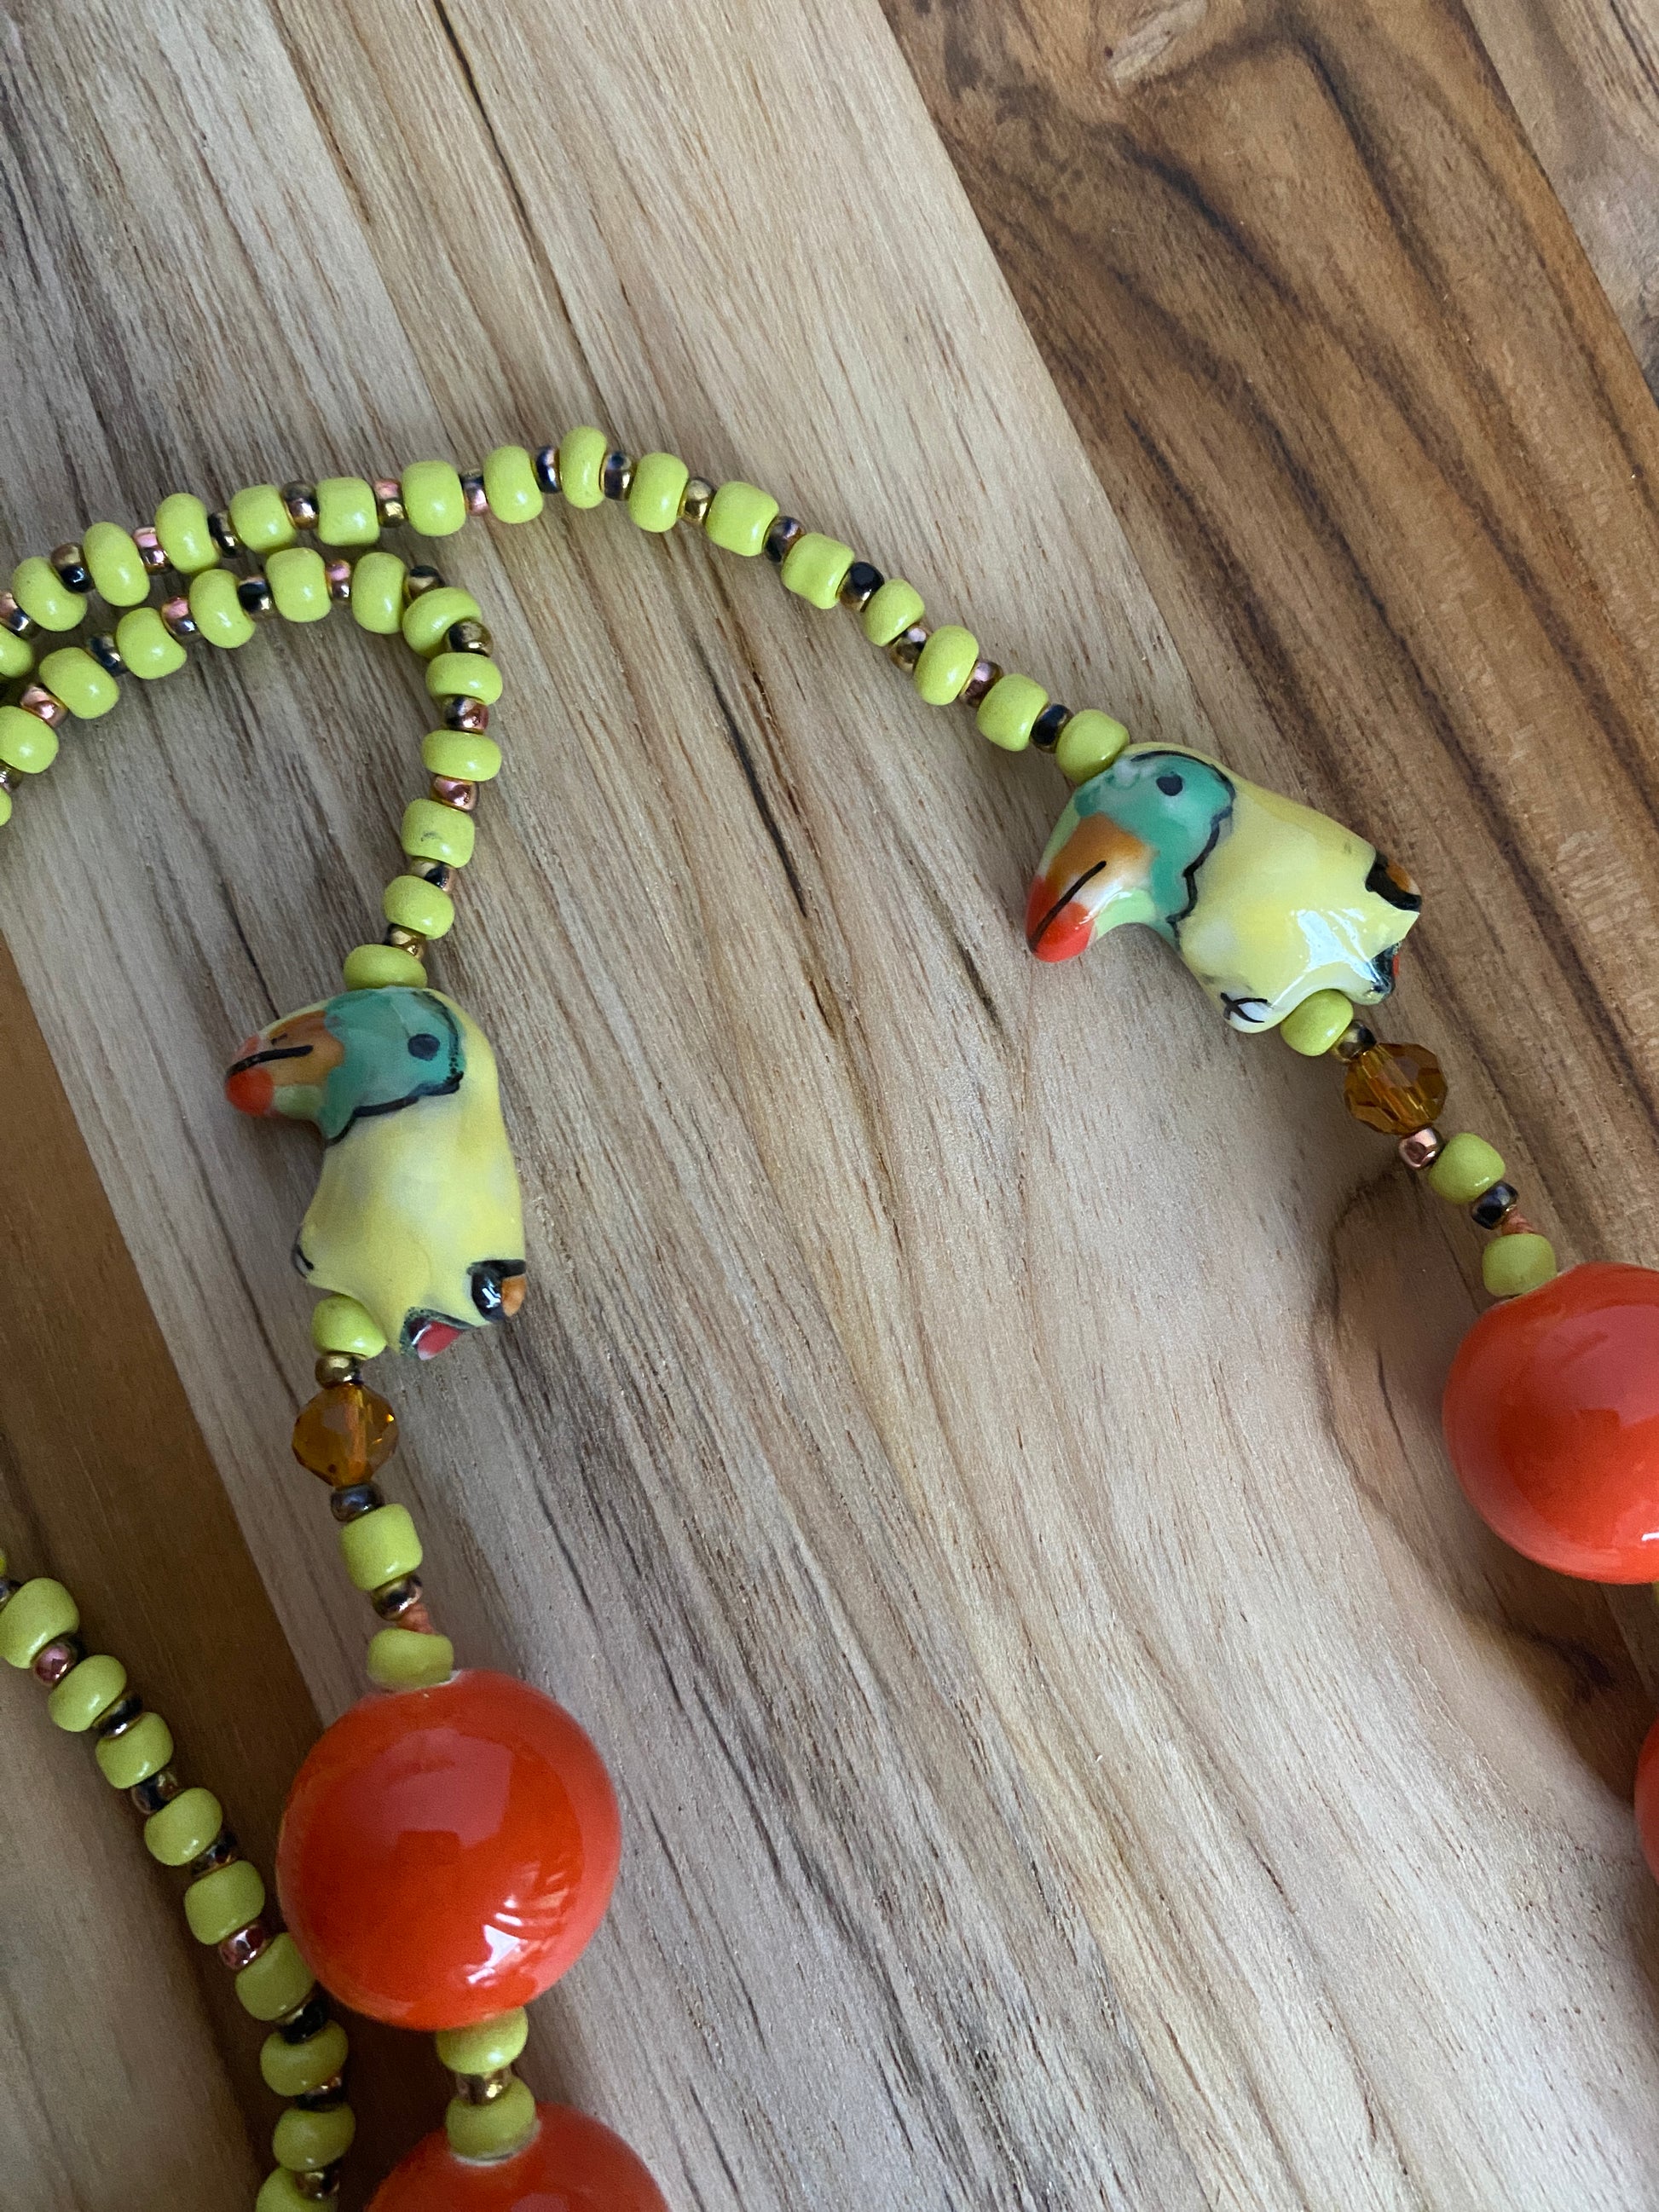 28" Long Large Orange Ceramic Beaded Necklace with Parrot and Yellow Beads - My Urban gems